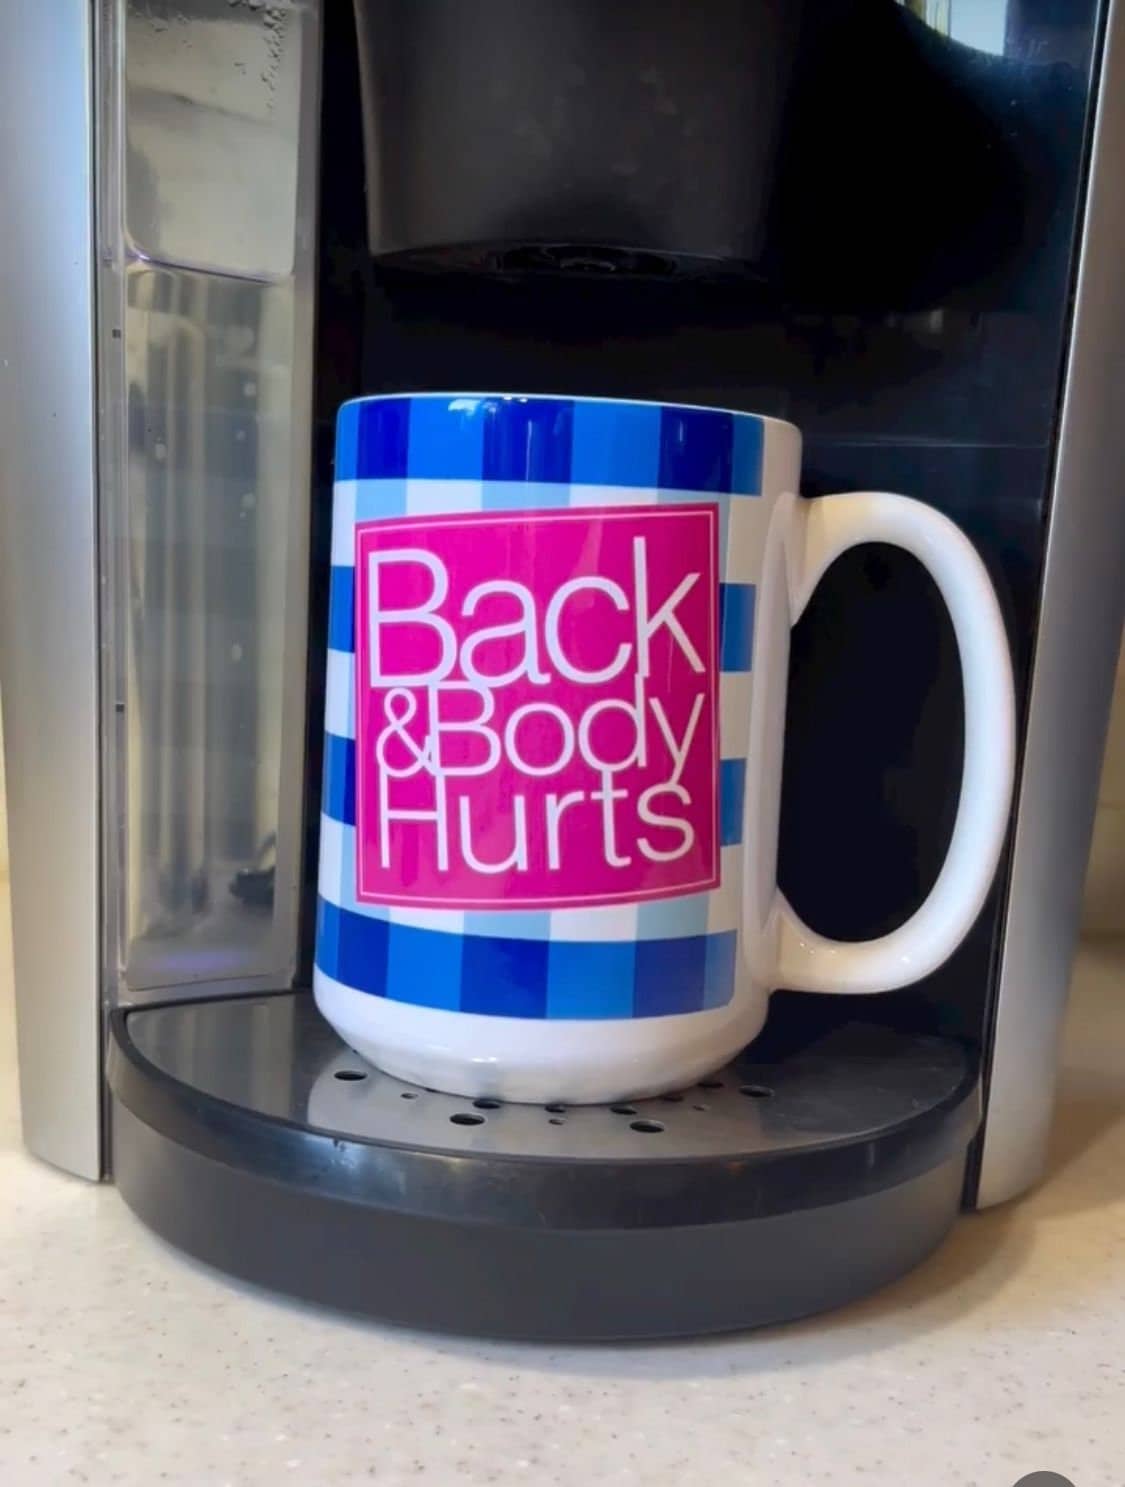 Back & Body Hurts Mug - Perfect gift for everyone Gifts for Mother's Day, Father’s Day, Friend’s, Grandparents, Teachers, Employee funny mug